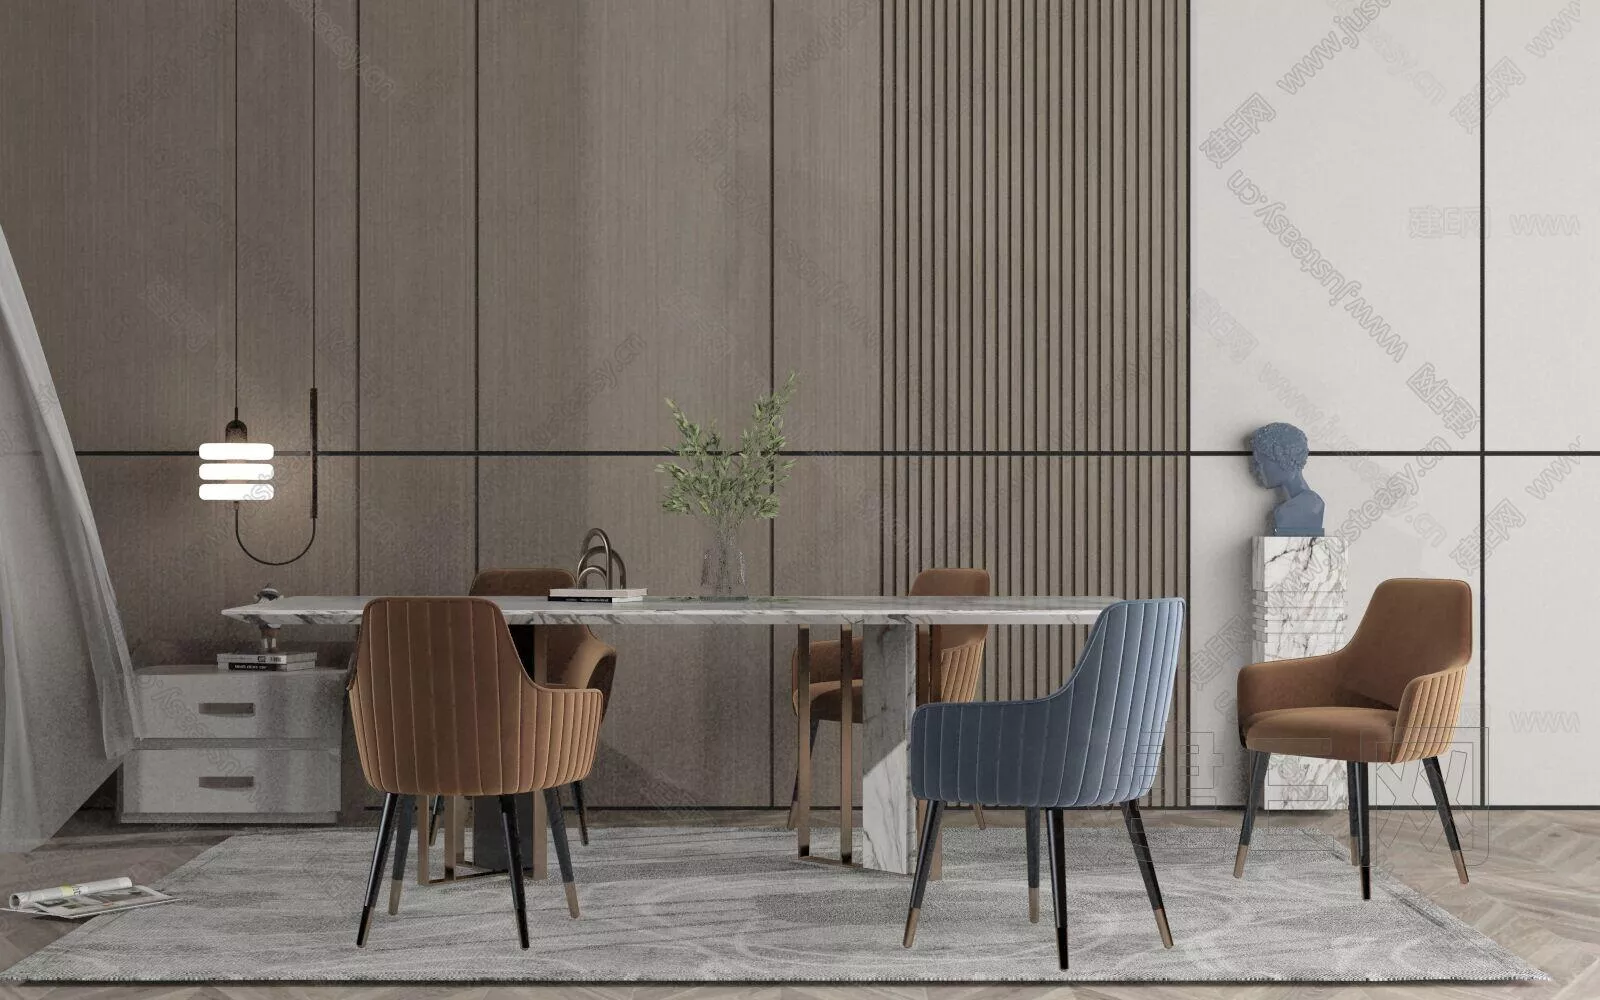 NORDIC DINING ROOM - SKETCHUP 3D SCENE - VRAY - 114771311